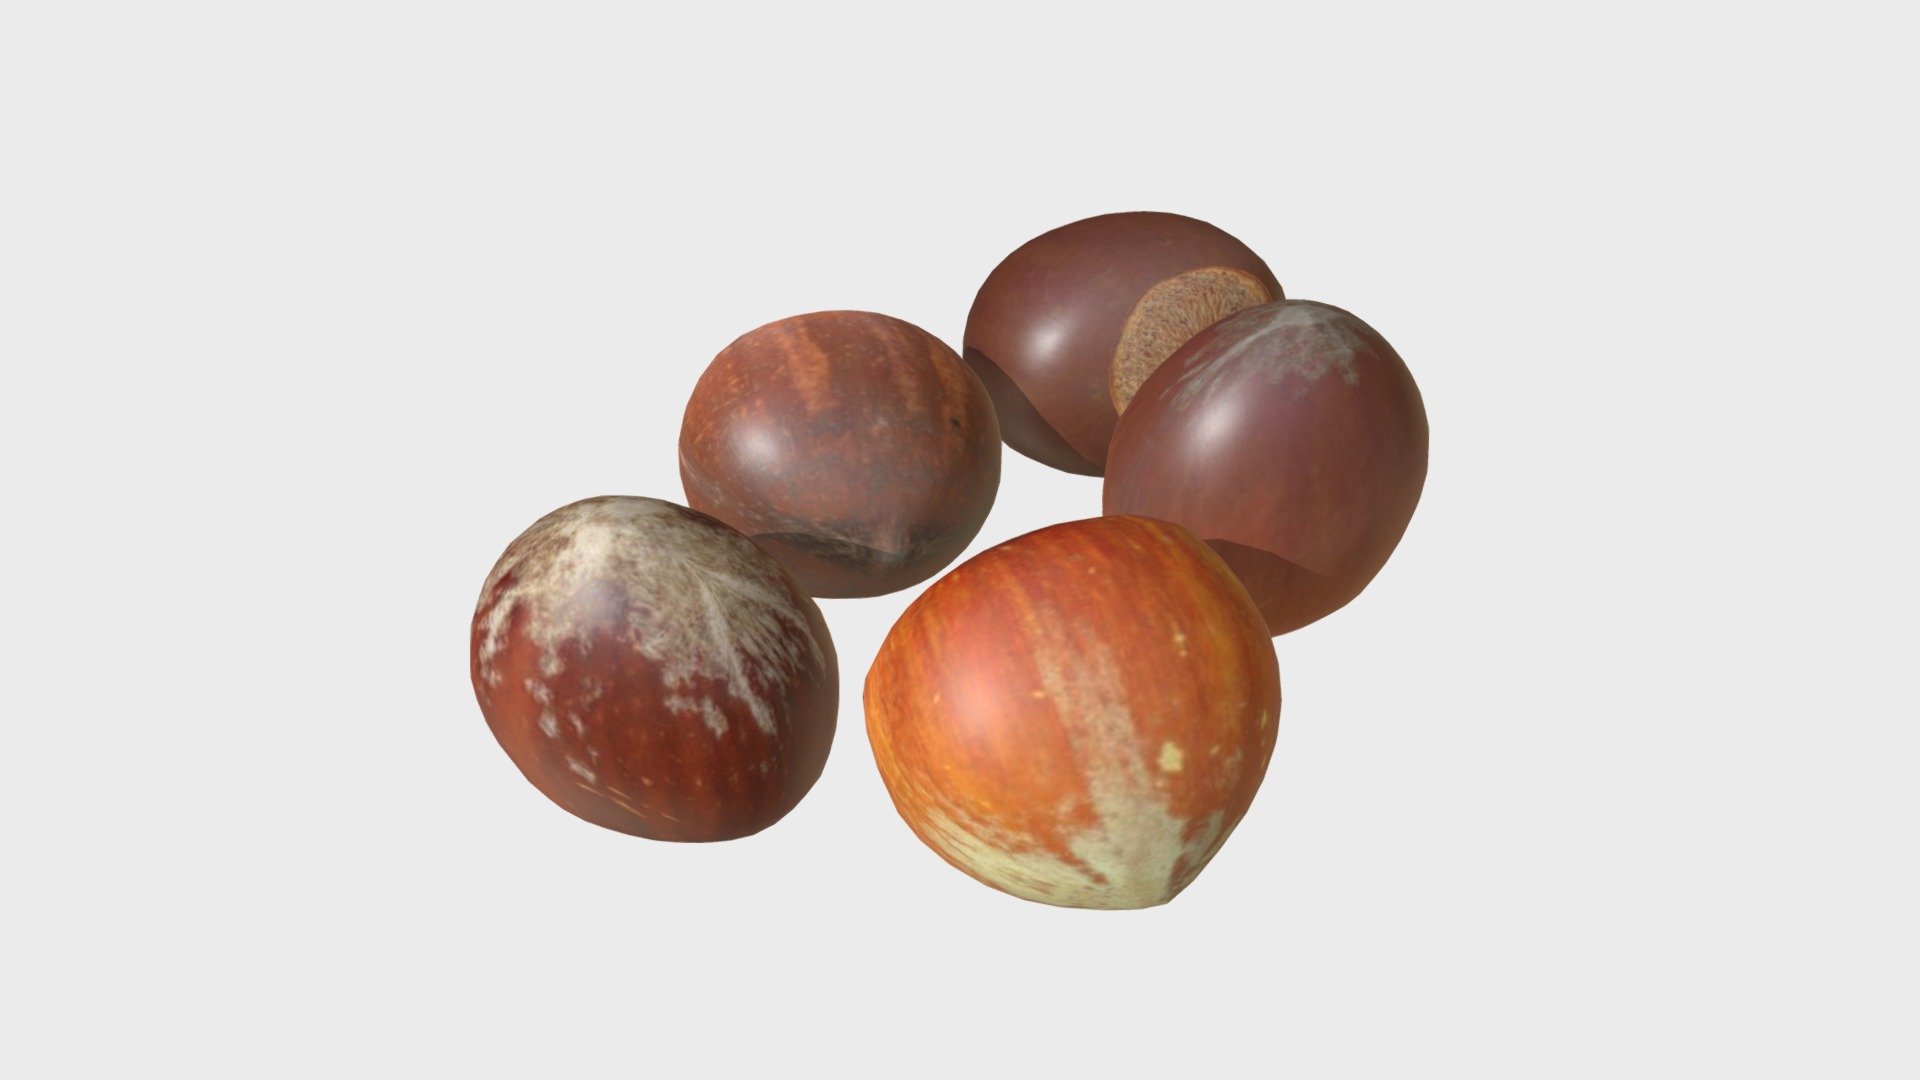 === The following description refers to the additional ZIP package provided with this model ===

Unshelled (whole) hazelnuts 3D Models. 5 individual objects sharing the same OVERLAPPING UV Layout map, Material and PBR Textures set. Production-ready 3D Model, with PBR materials, textures, overlapping UV Layout map provided in the package.

Quads only geometries (no tris/ngons).

Formats included: FBX, OBJ; scenes: BLEND (with Cycles / Eevee PBR Materials and Textures); other: 16-bit PNGs with Alpha.

5 Objects (meshes), 1 PBR Material, UV unwrapped (overlapping UV Layout map provided in the package); UV-mapped Textures.

UV Layout maps and Image Textures resolutions: 2048x2048; PBR Textures made with Substance Painter.

Polygonal, QUADS ONLY (no tris/ngons); 3210 vertices, 3200 quad faces (6400 tris).

Real world dimensions; scene scale units: cm in Blender 3.3 (that is: Metric with 0.01 scale).

Uniform scale object (scale applied in Blender 3.3) 3d model